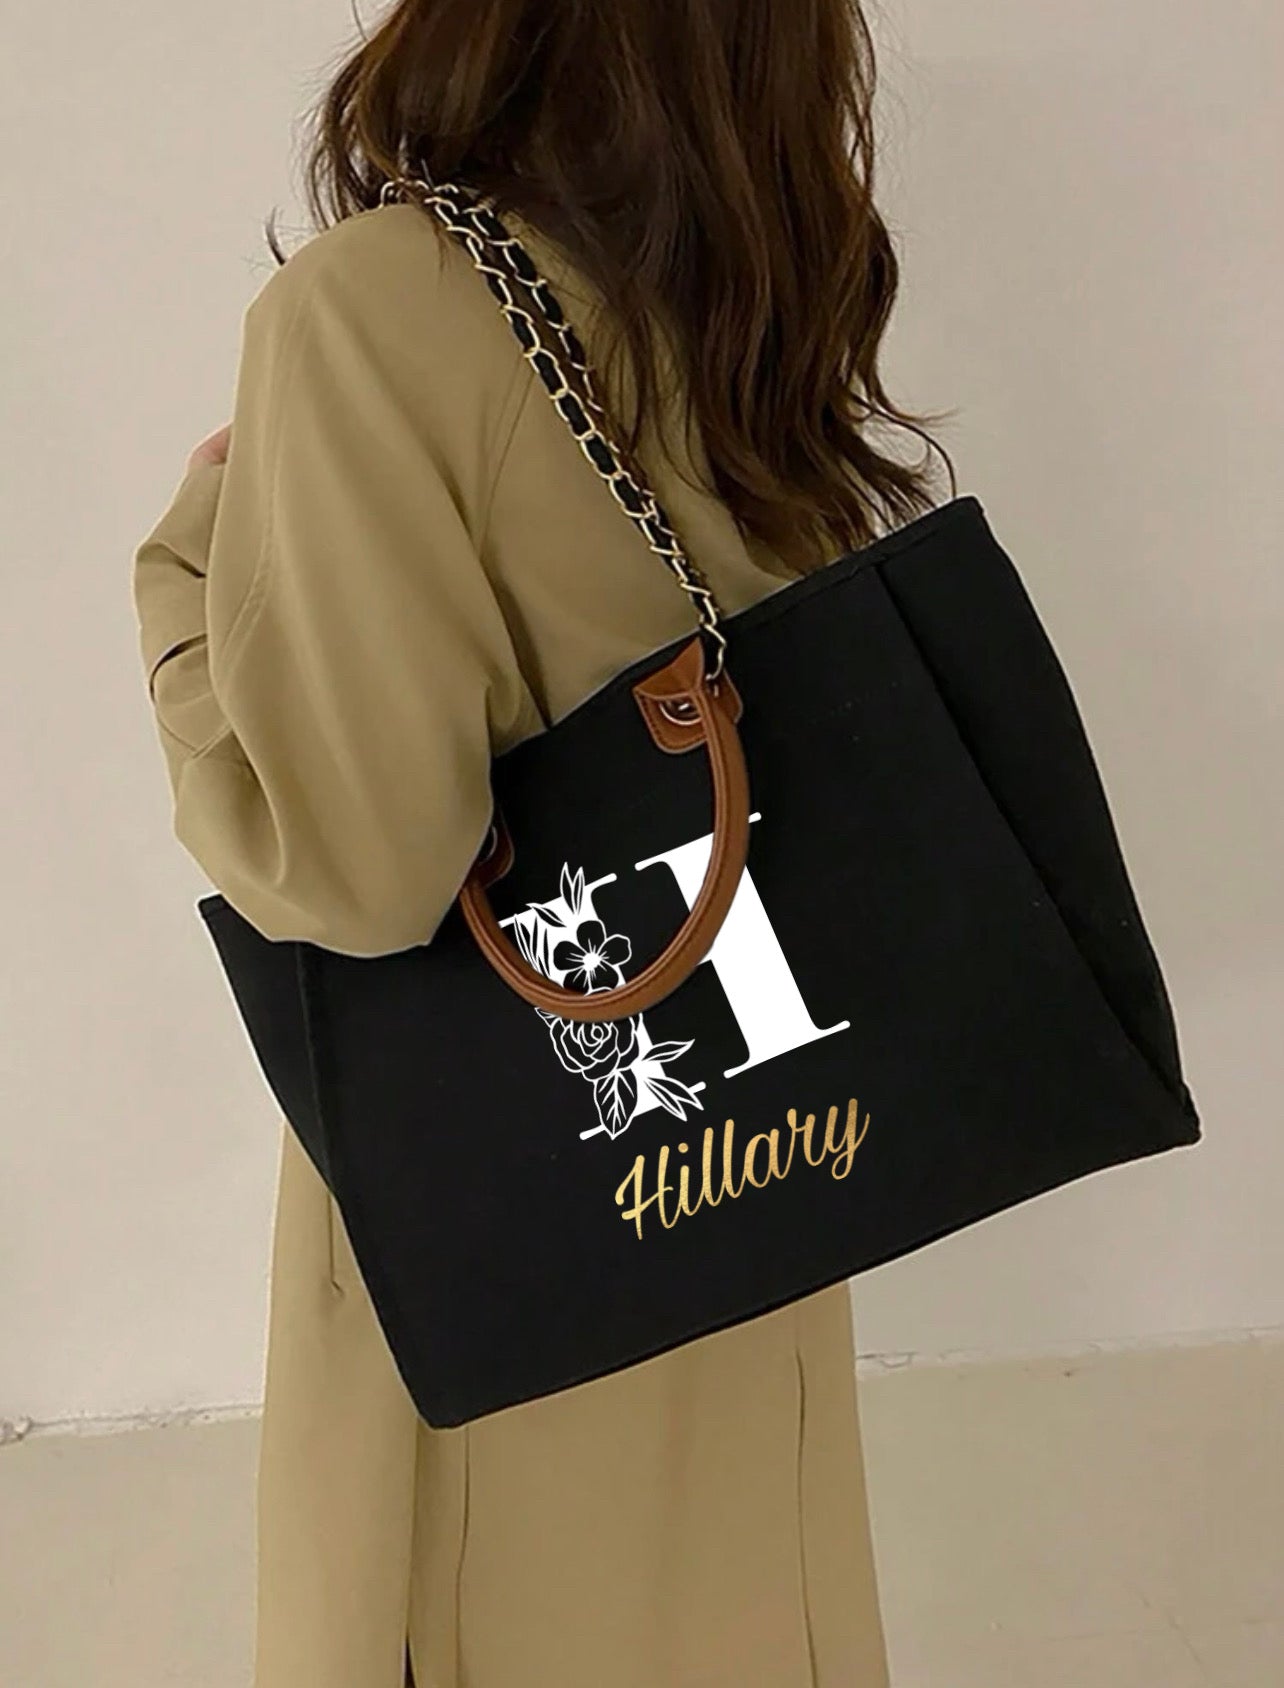 3 Cool Ways to Personalize a Plain Tote Bag